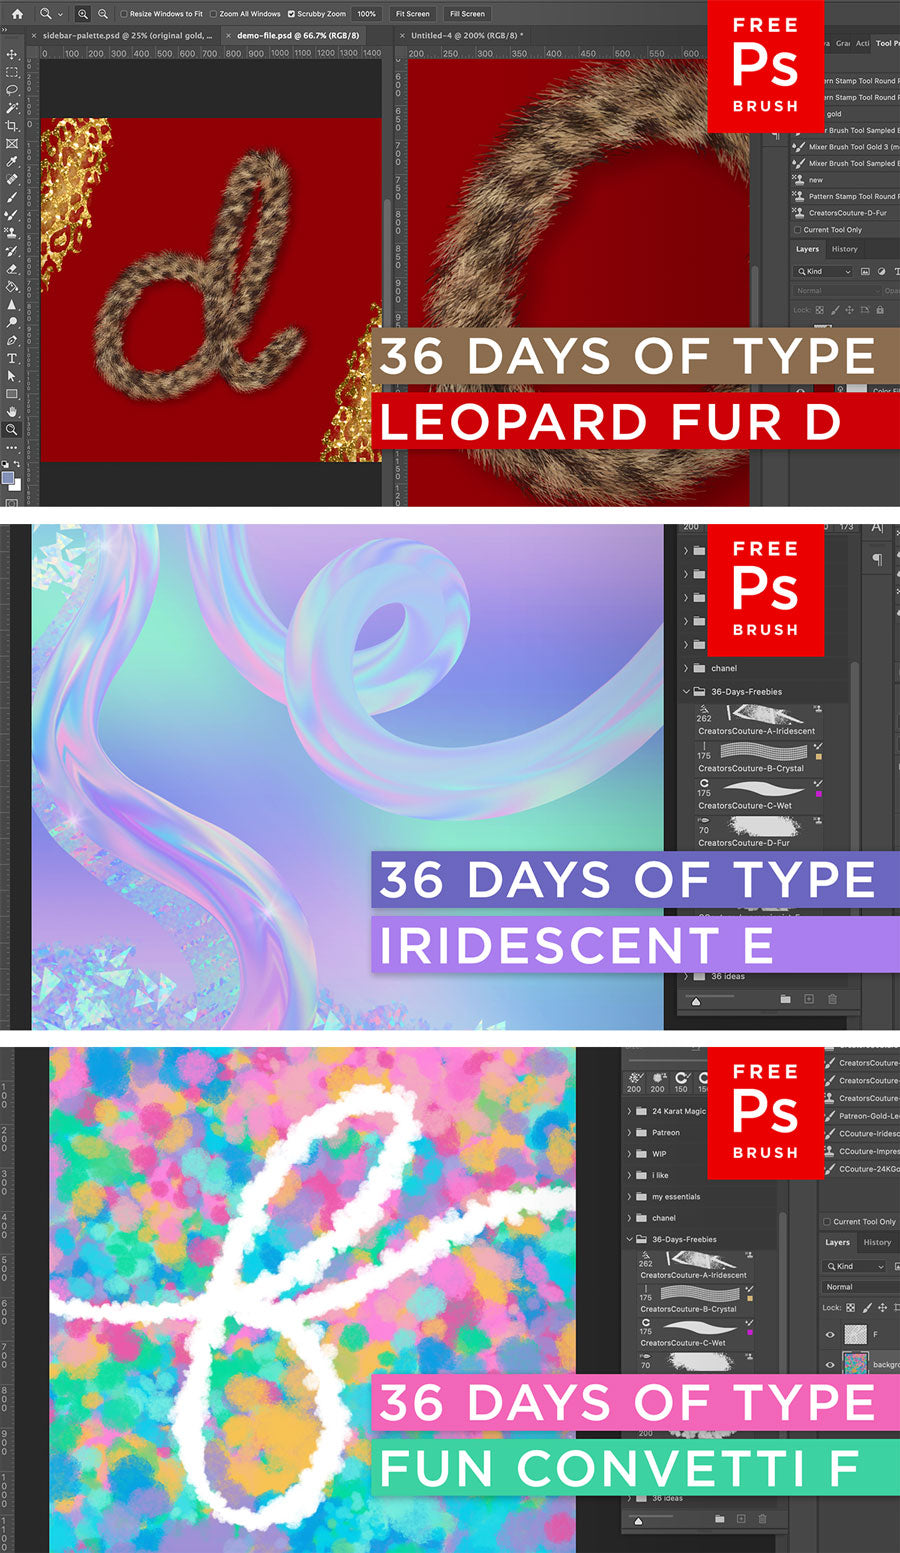 free photoshop brushes for 36 days of type